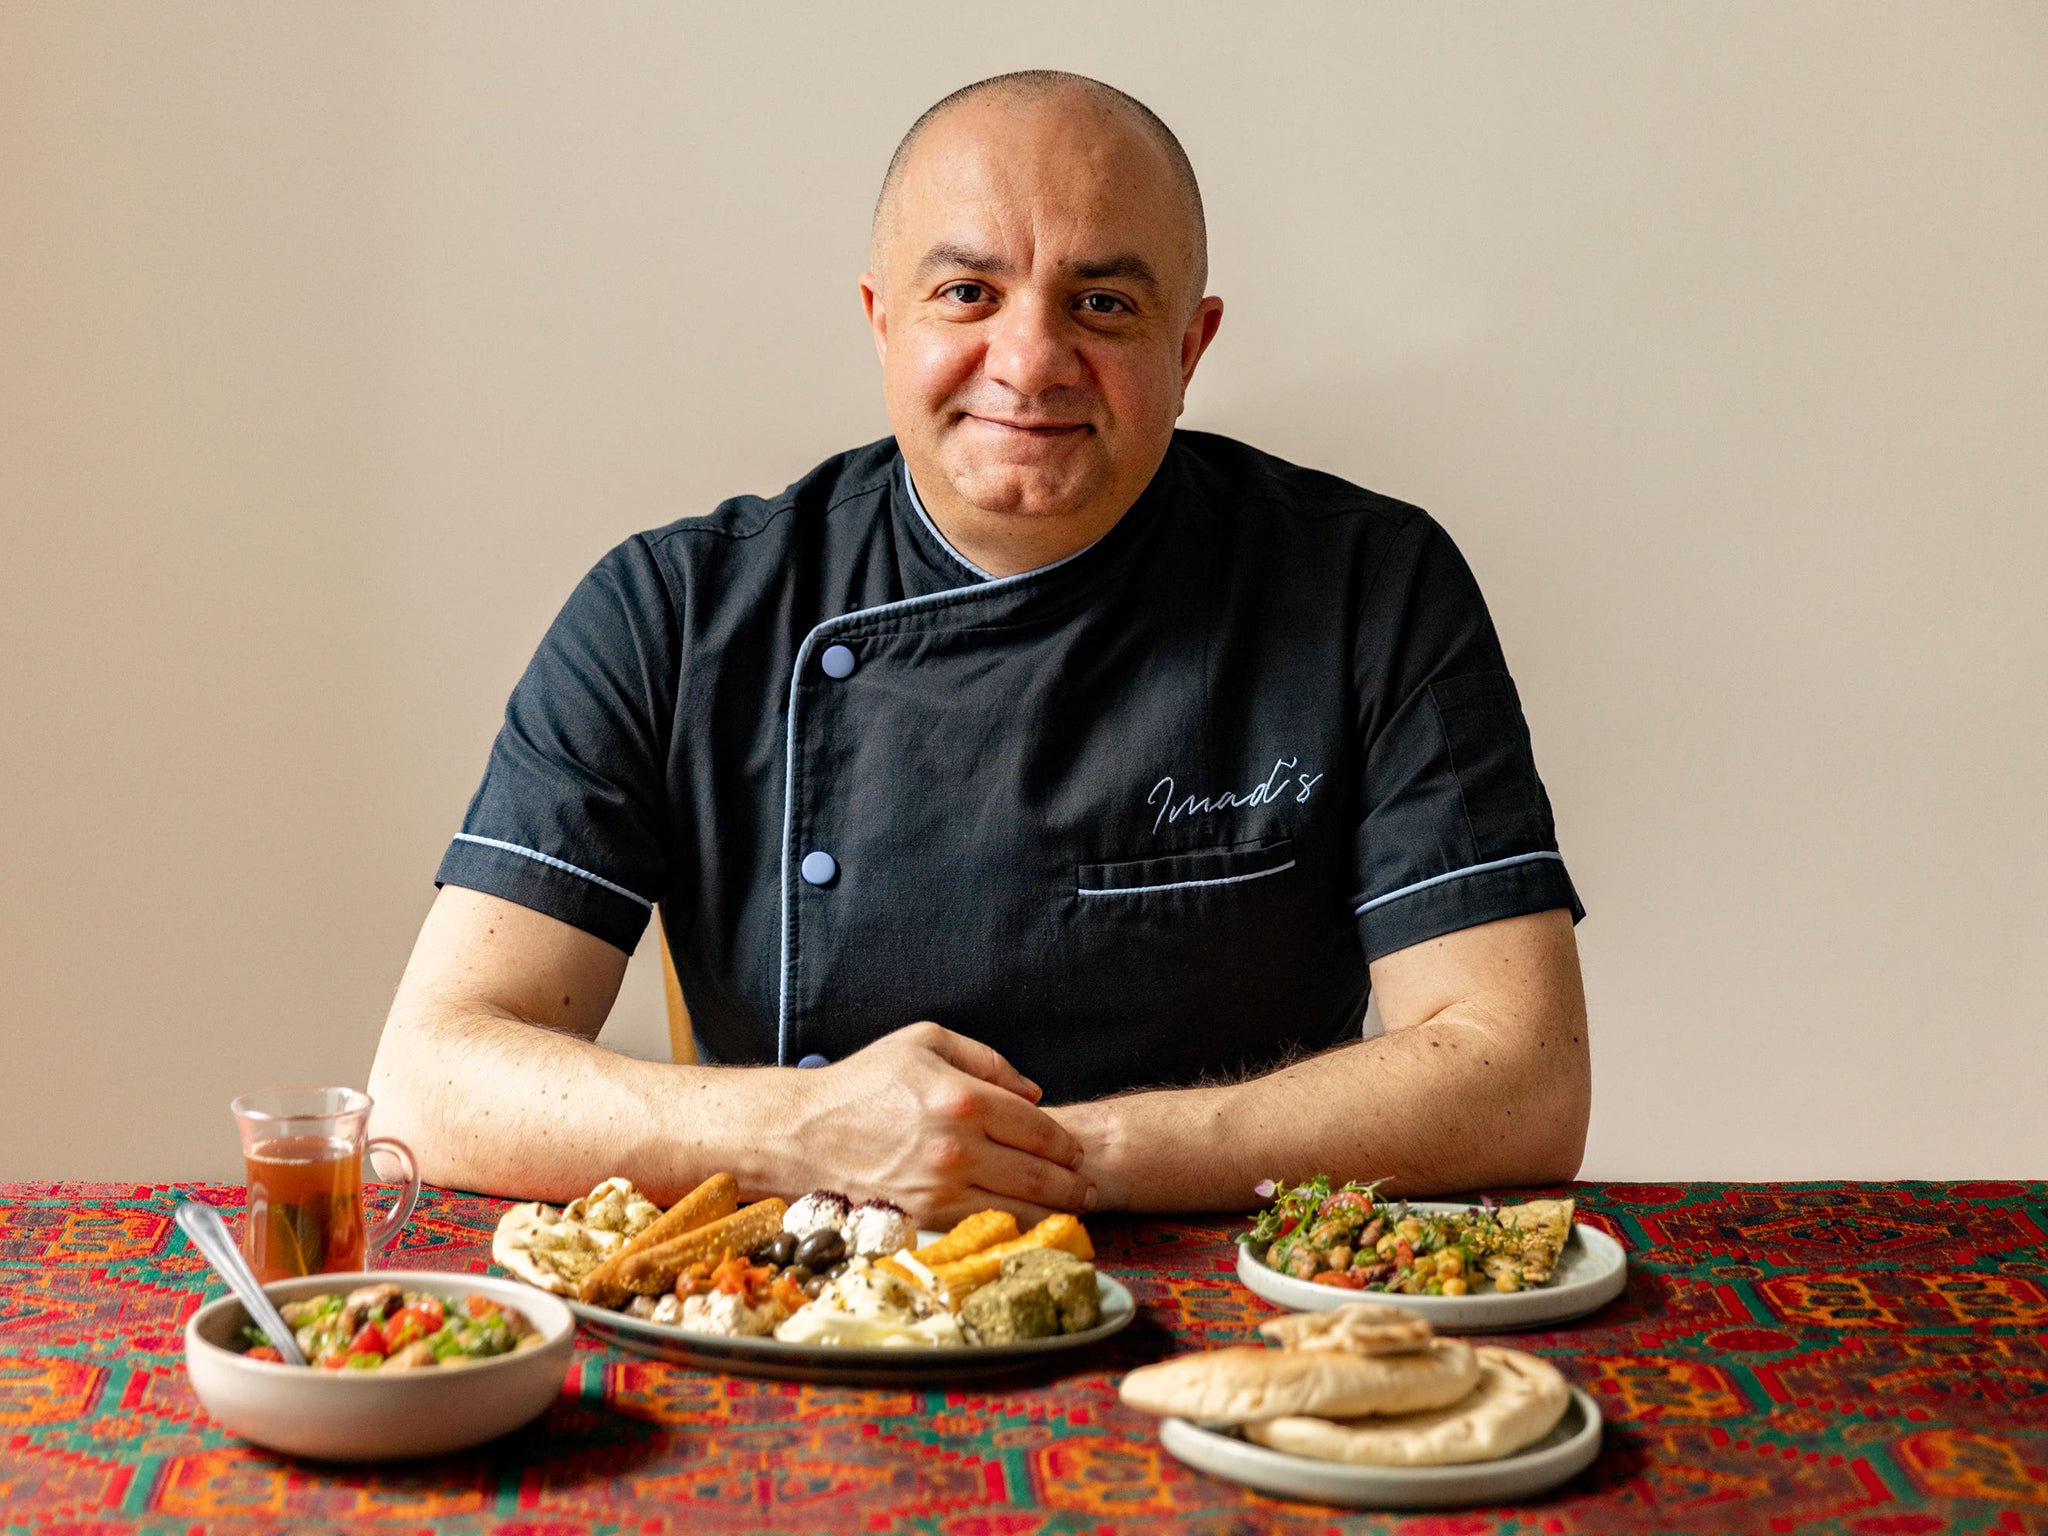 After losing everything and starting from scratch in a new country, Alarnab has a highly acclaimed restaurant and now a cookbook